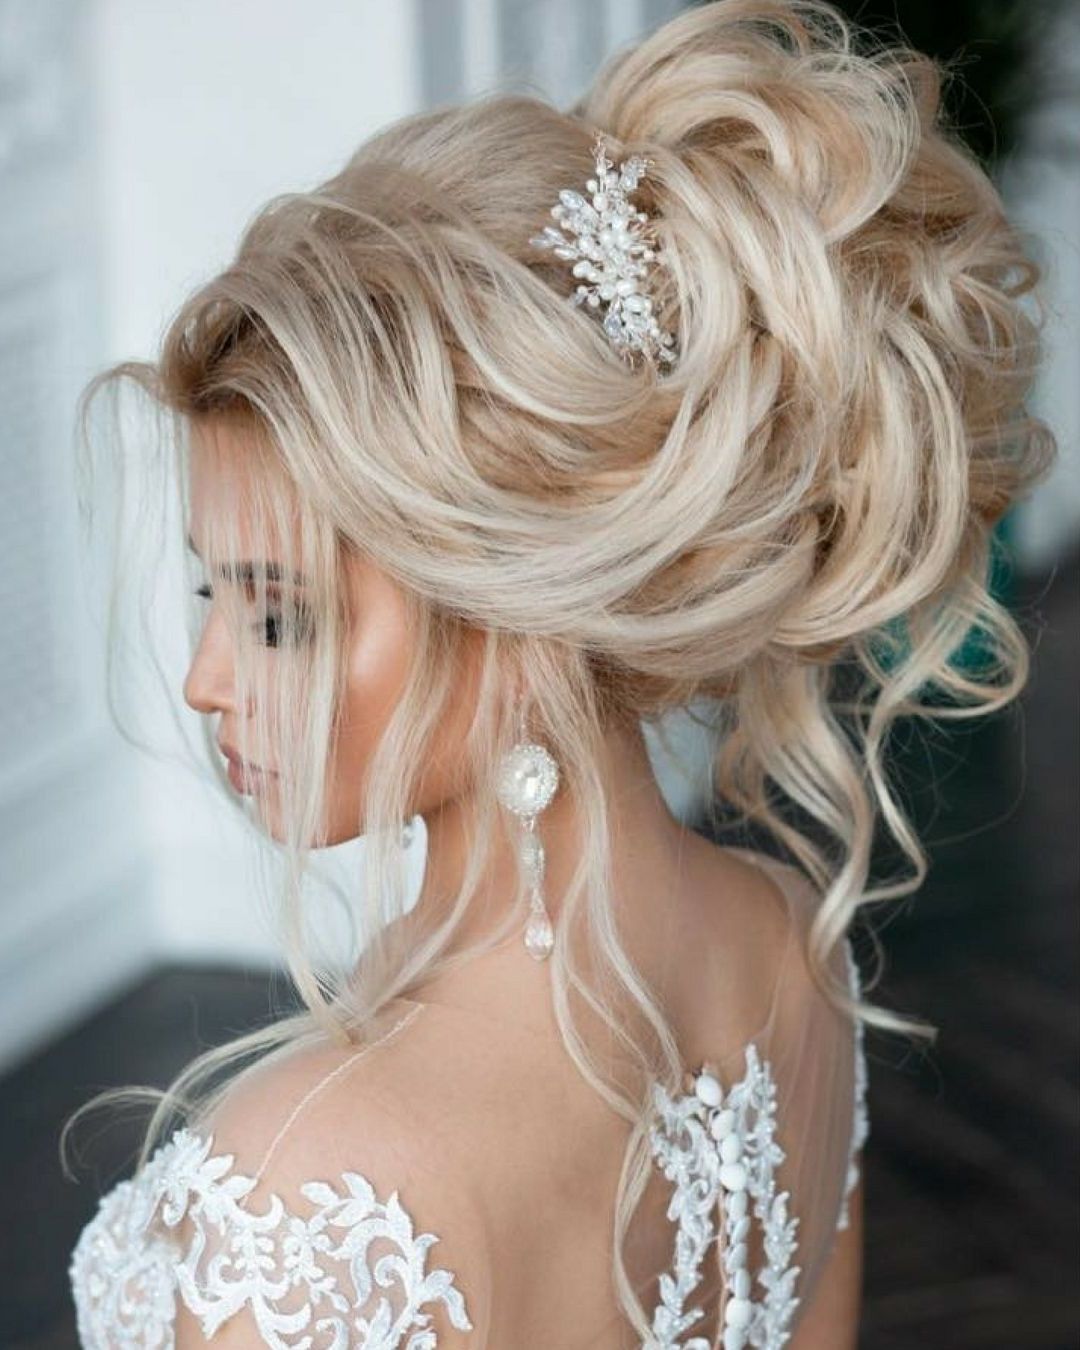 Beautifully Volume Updo And Elegant Hair Accessory (View 4 of 25)